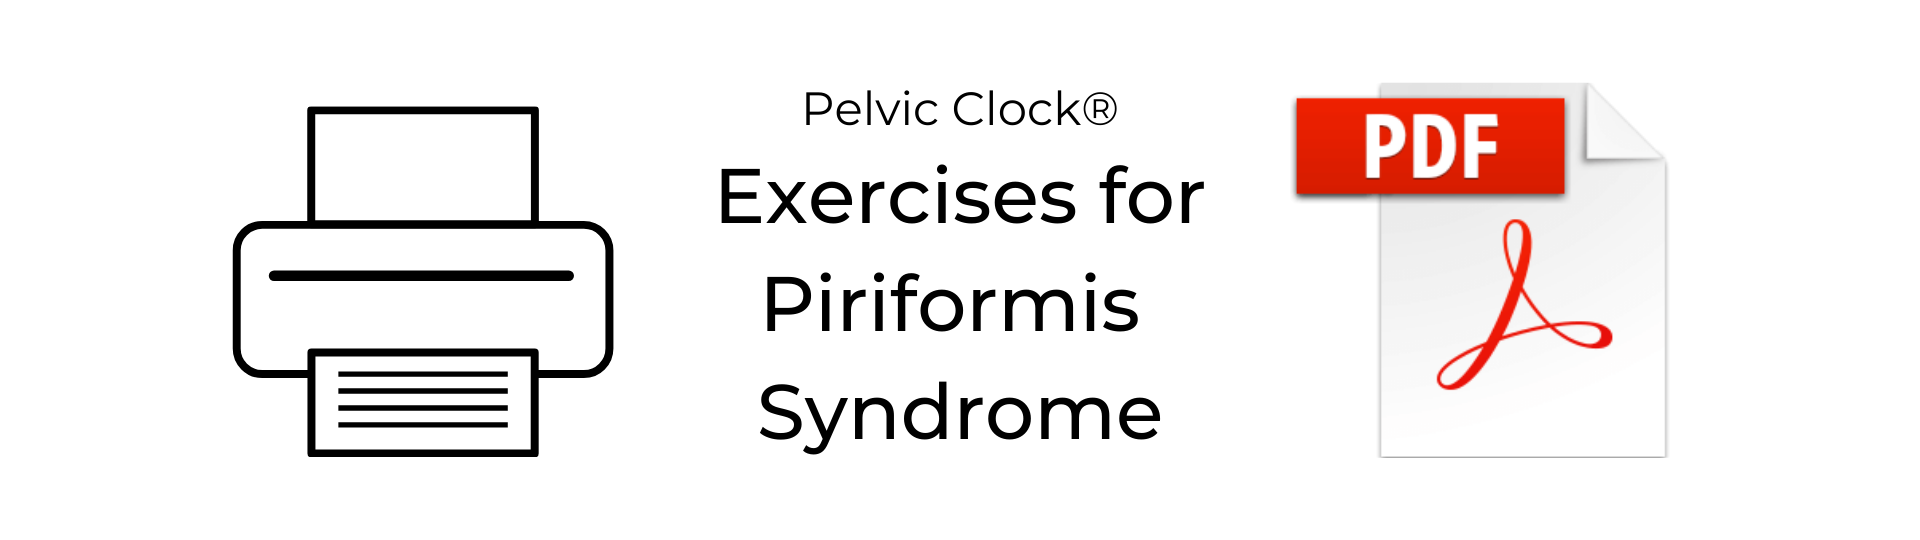 Piriformis syndrome causes and treatment with 6 exercises